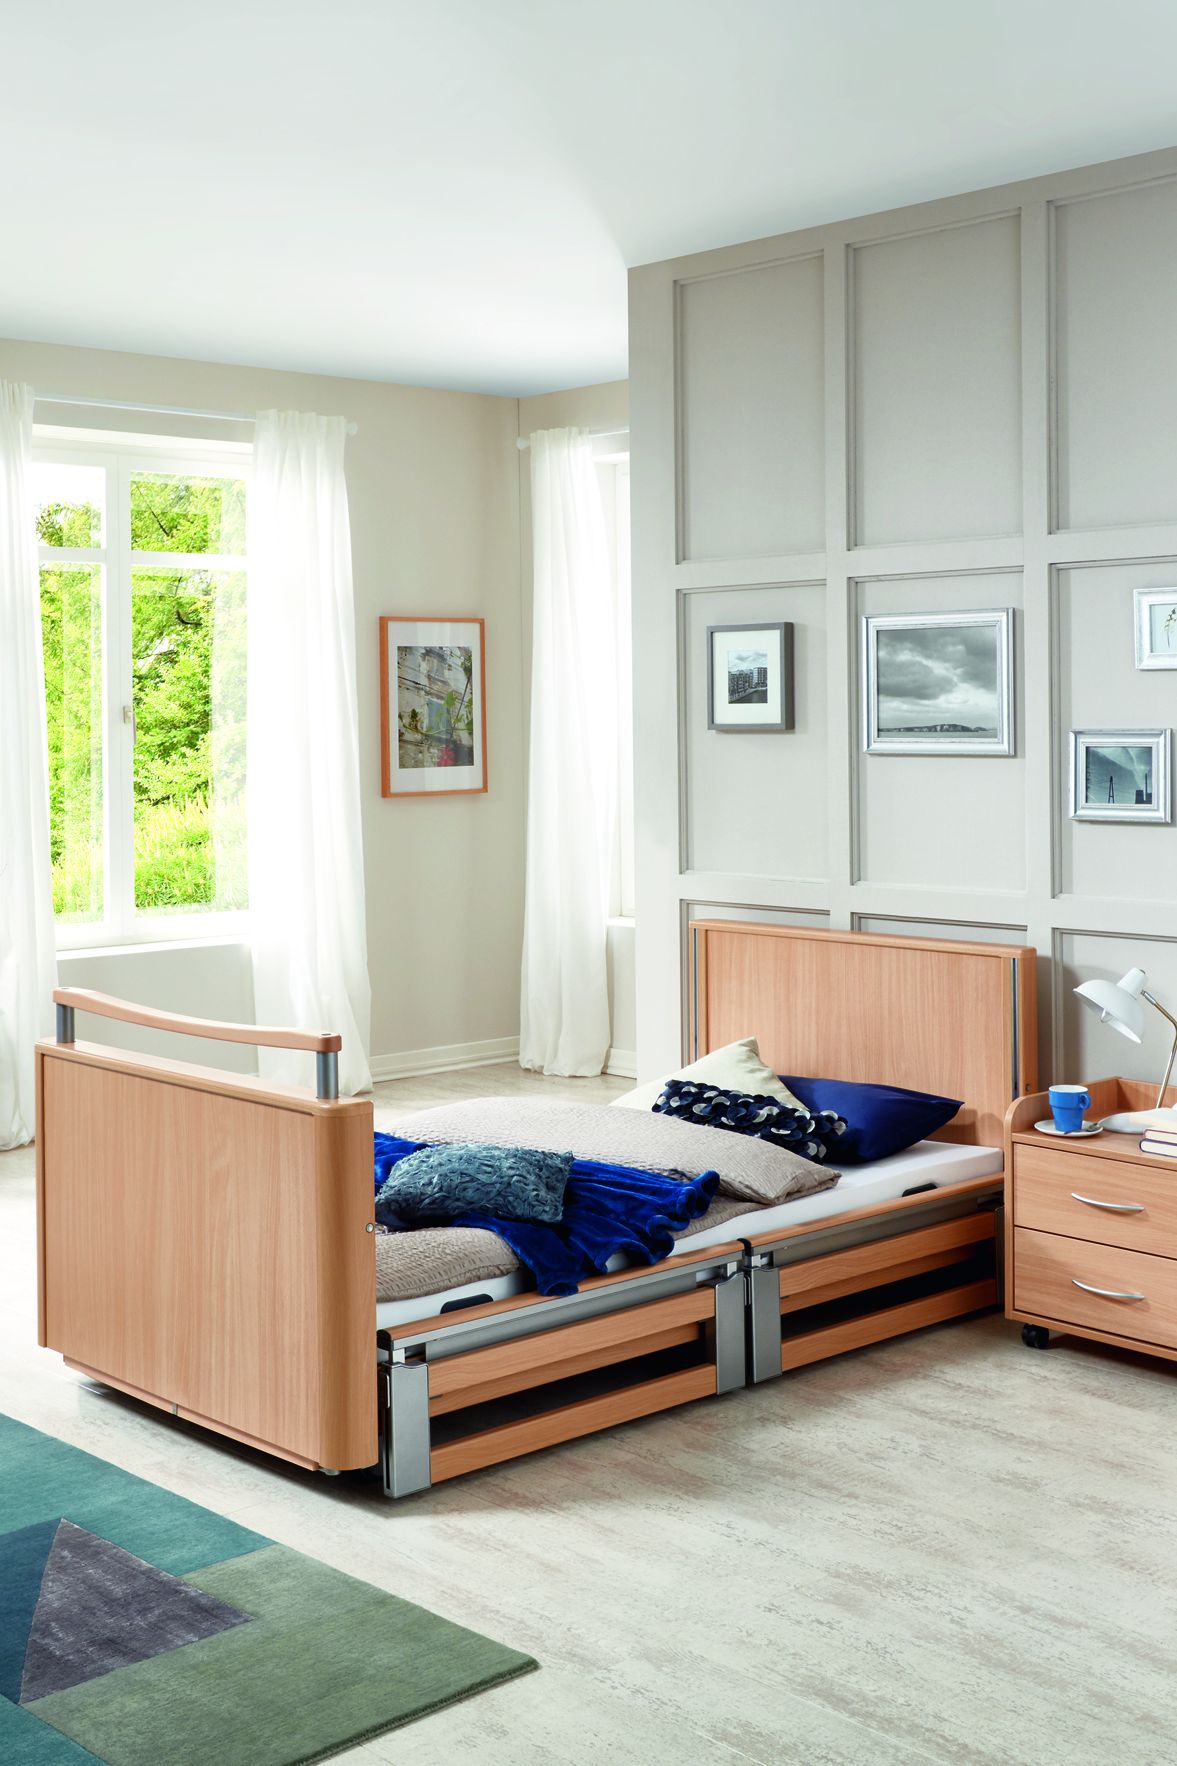 Optional telescopic safety side of the Inovia care bed